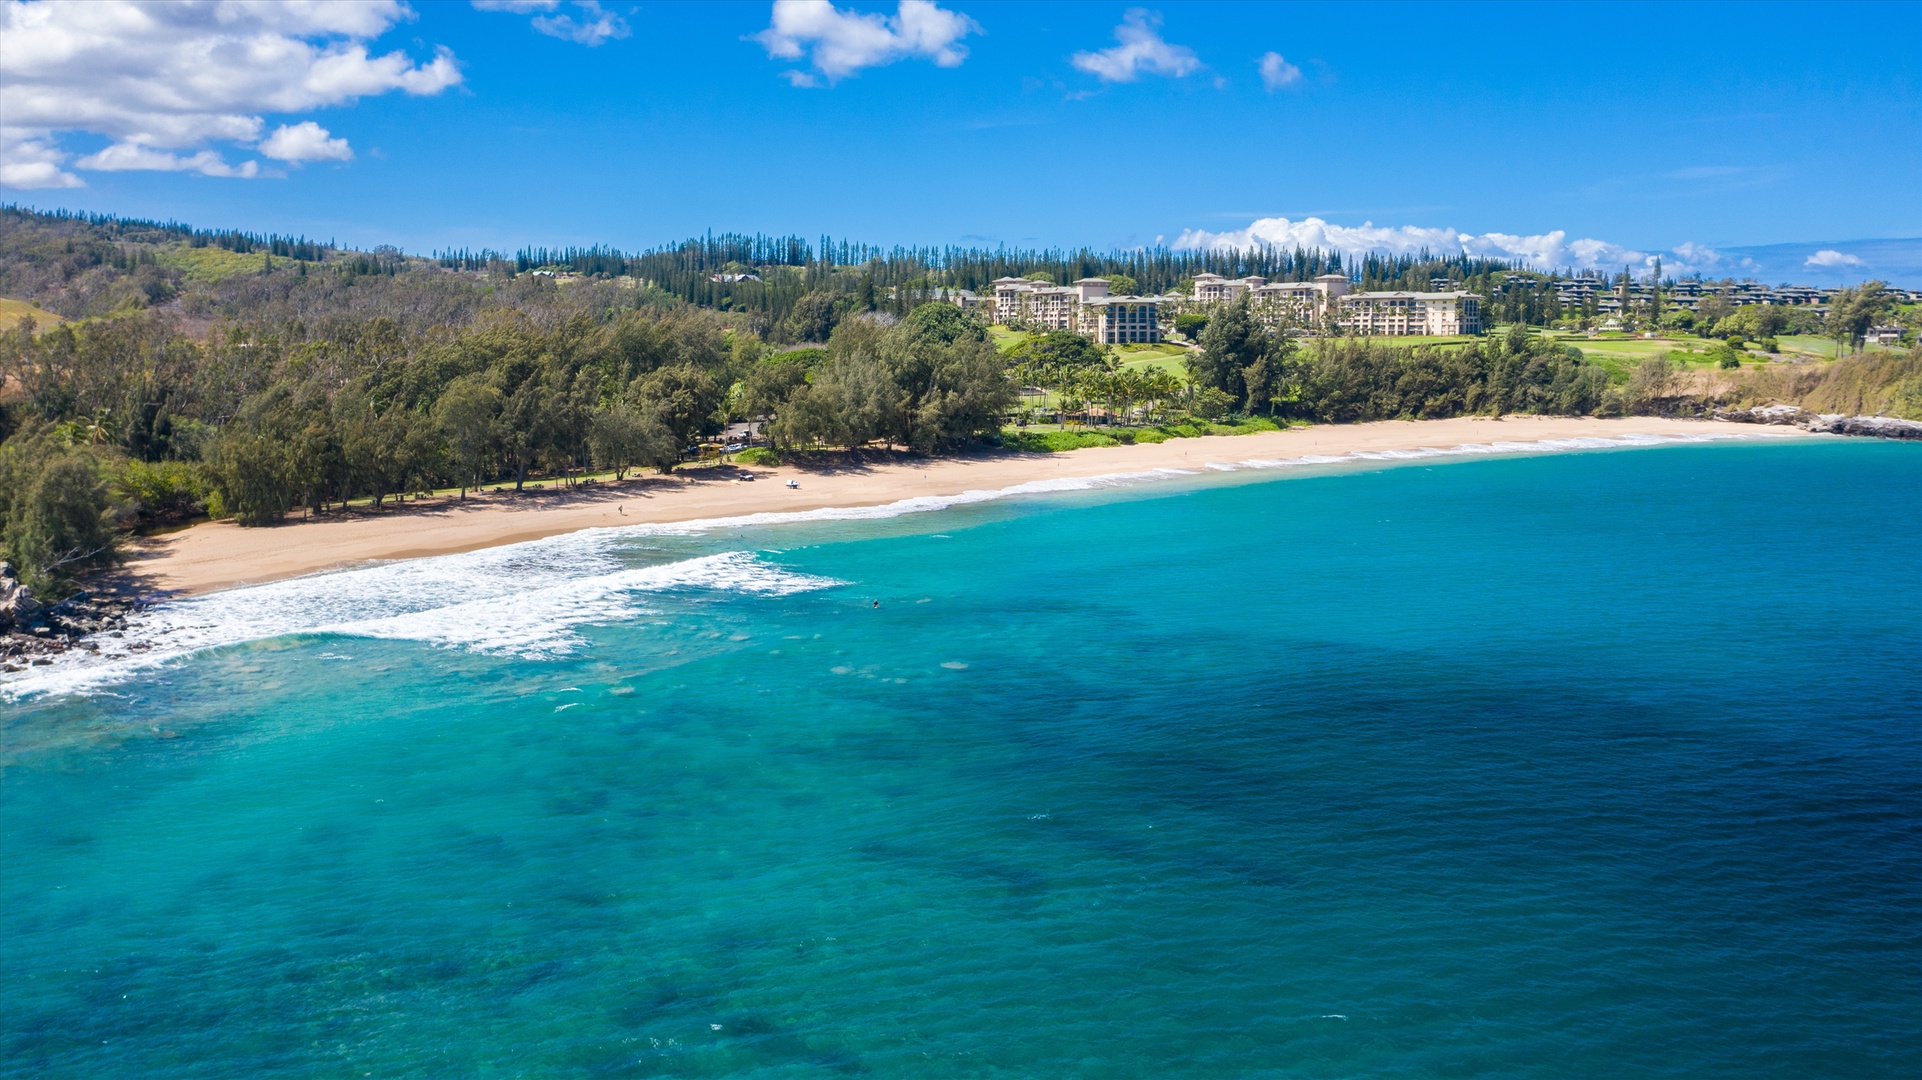 Kaanapali Vacation Rentals, Sea Shells Beach House on Ka`anapali Beach* - D.T. Fleming Beach recently rated in the Top 5 best American beaches!